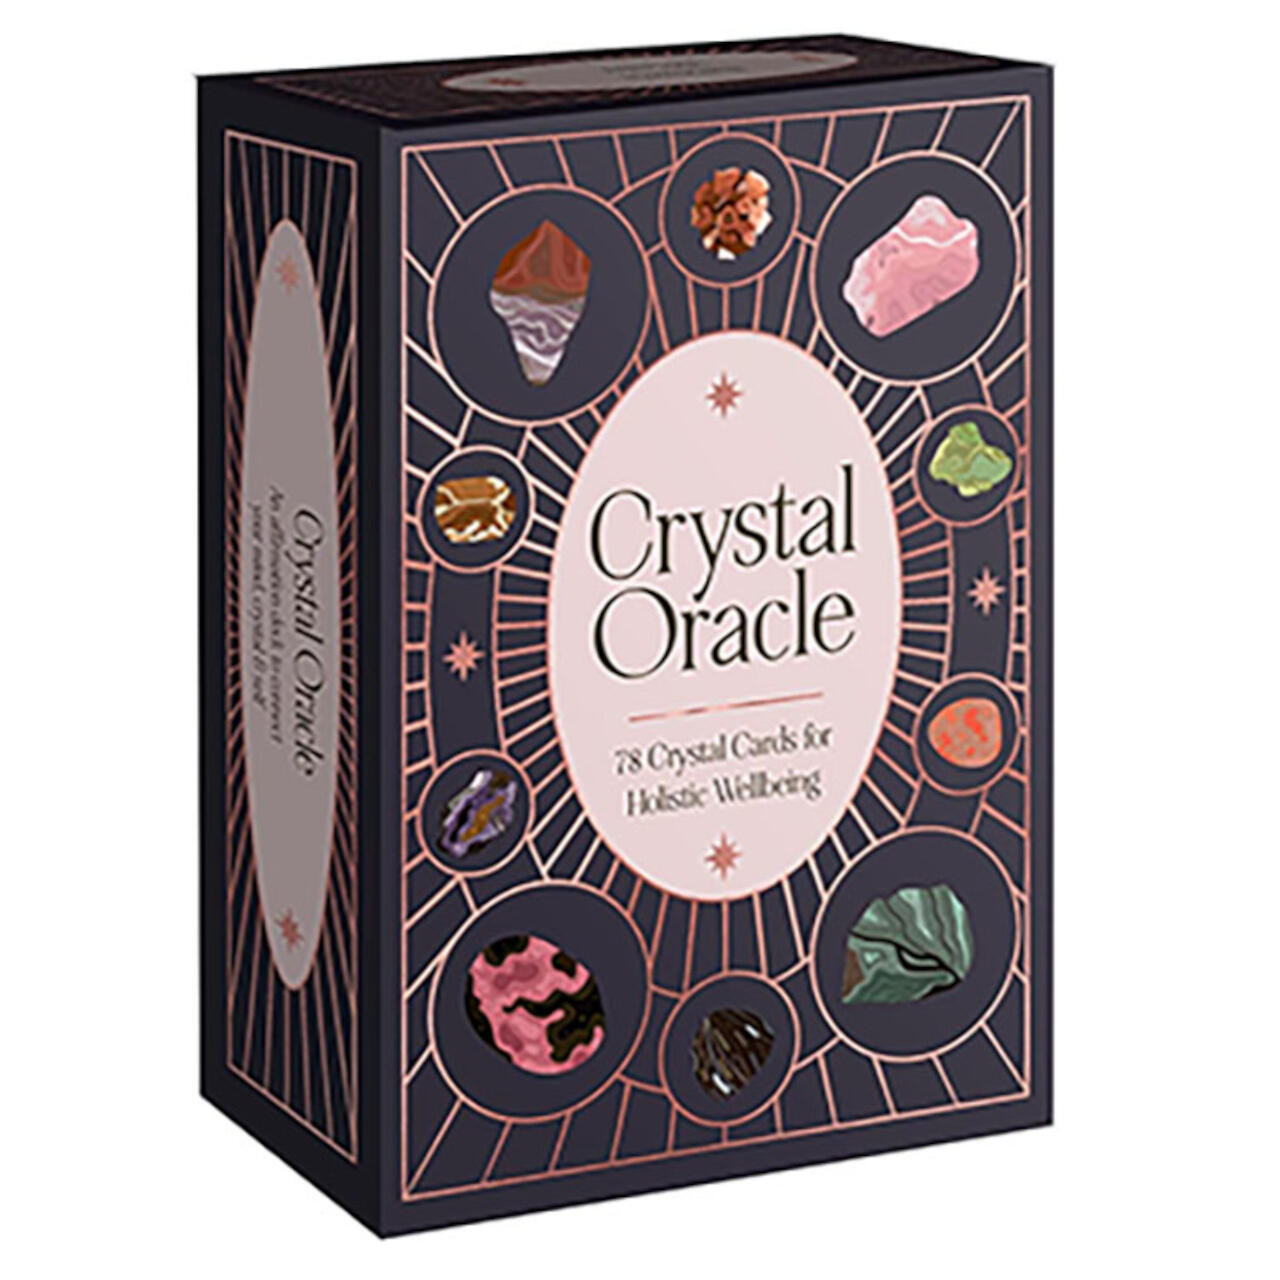 Crystal Oracle Deck By Lester & Banegas